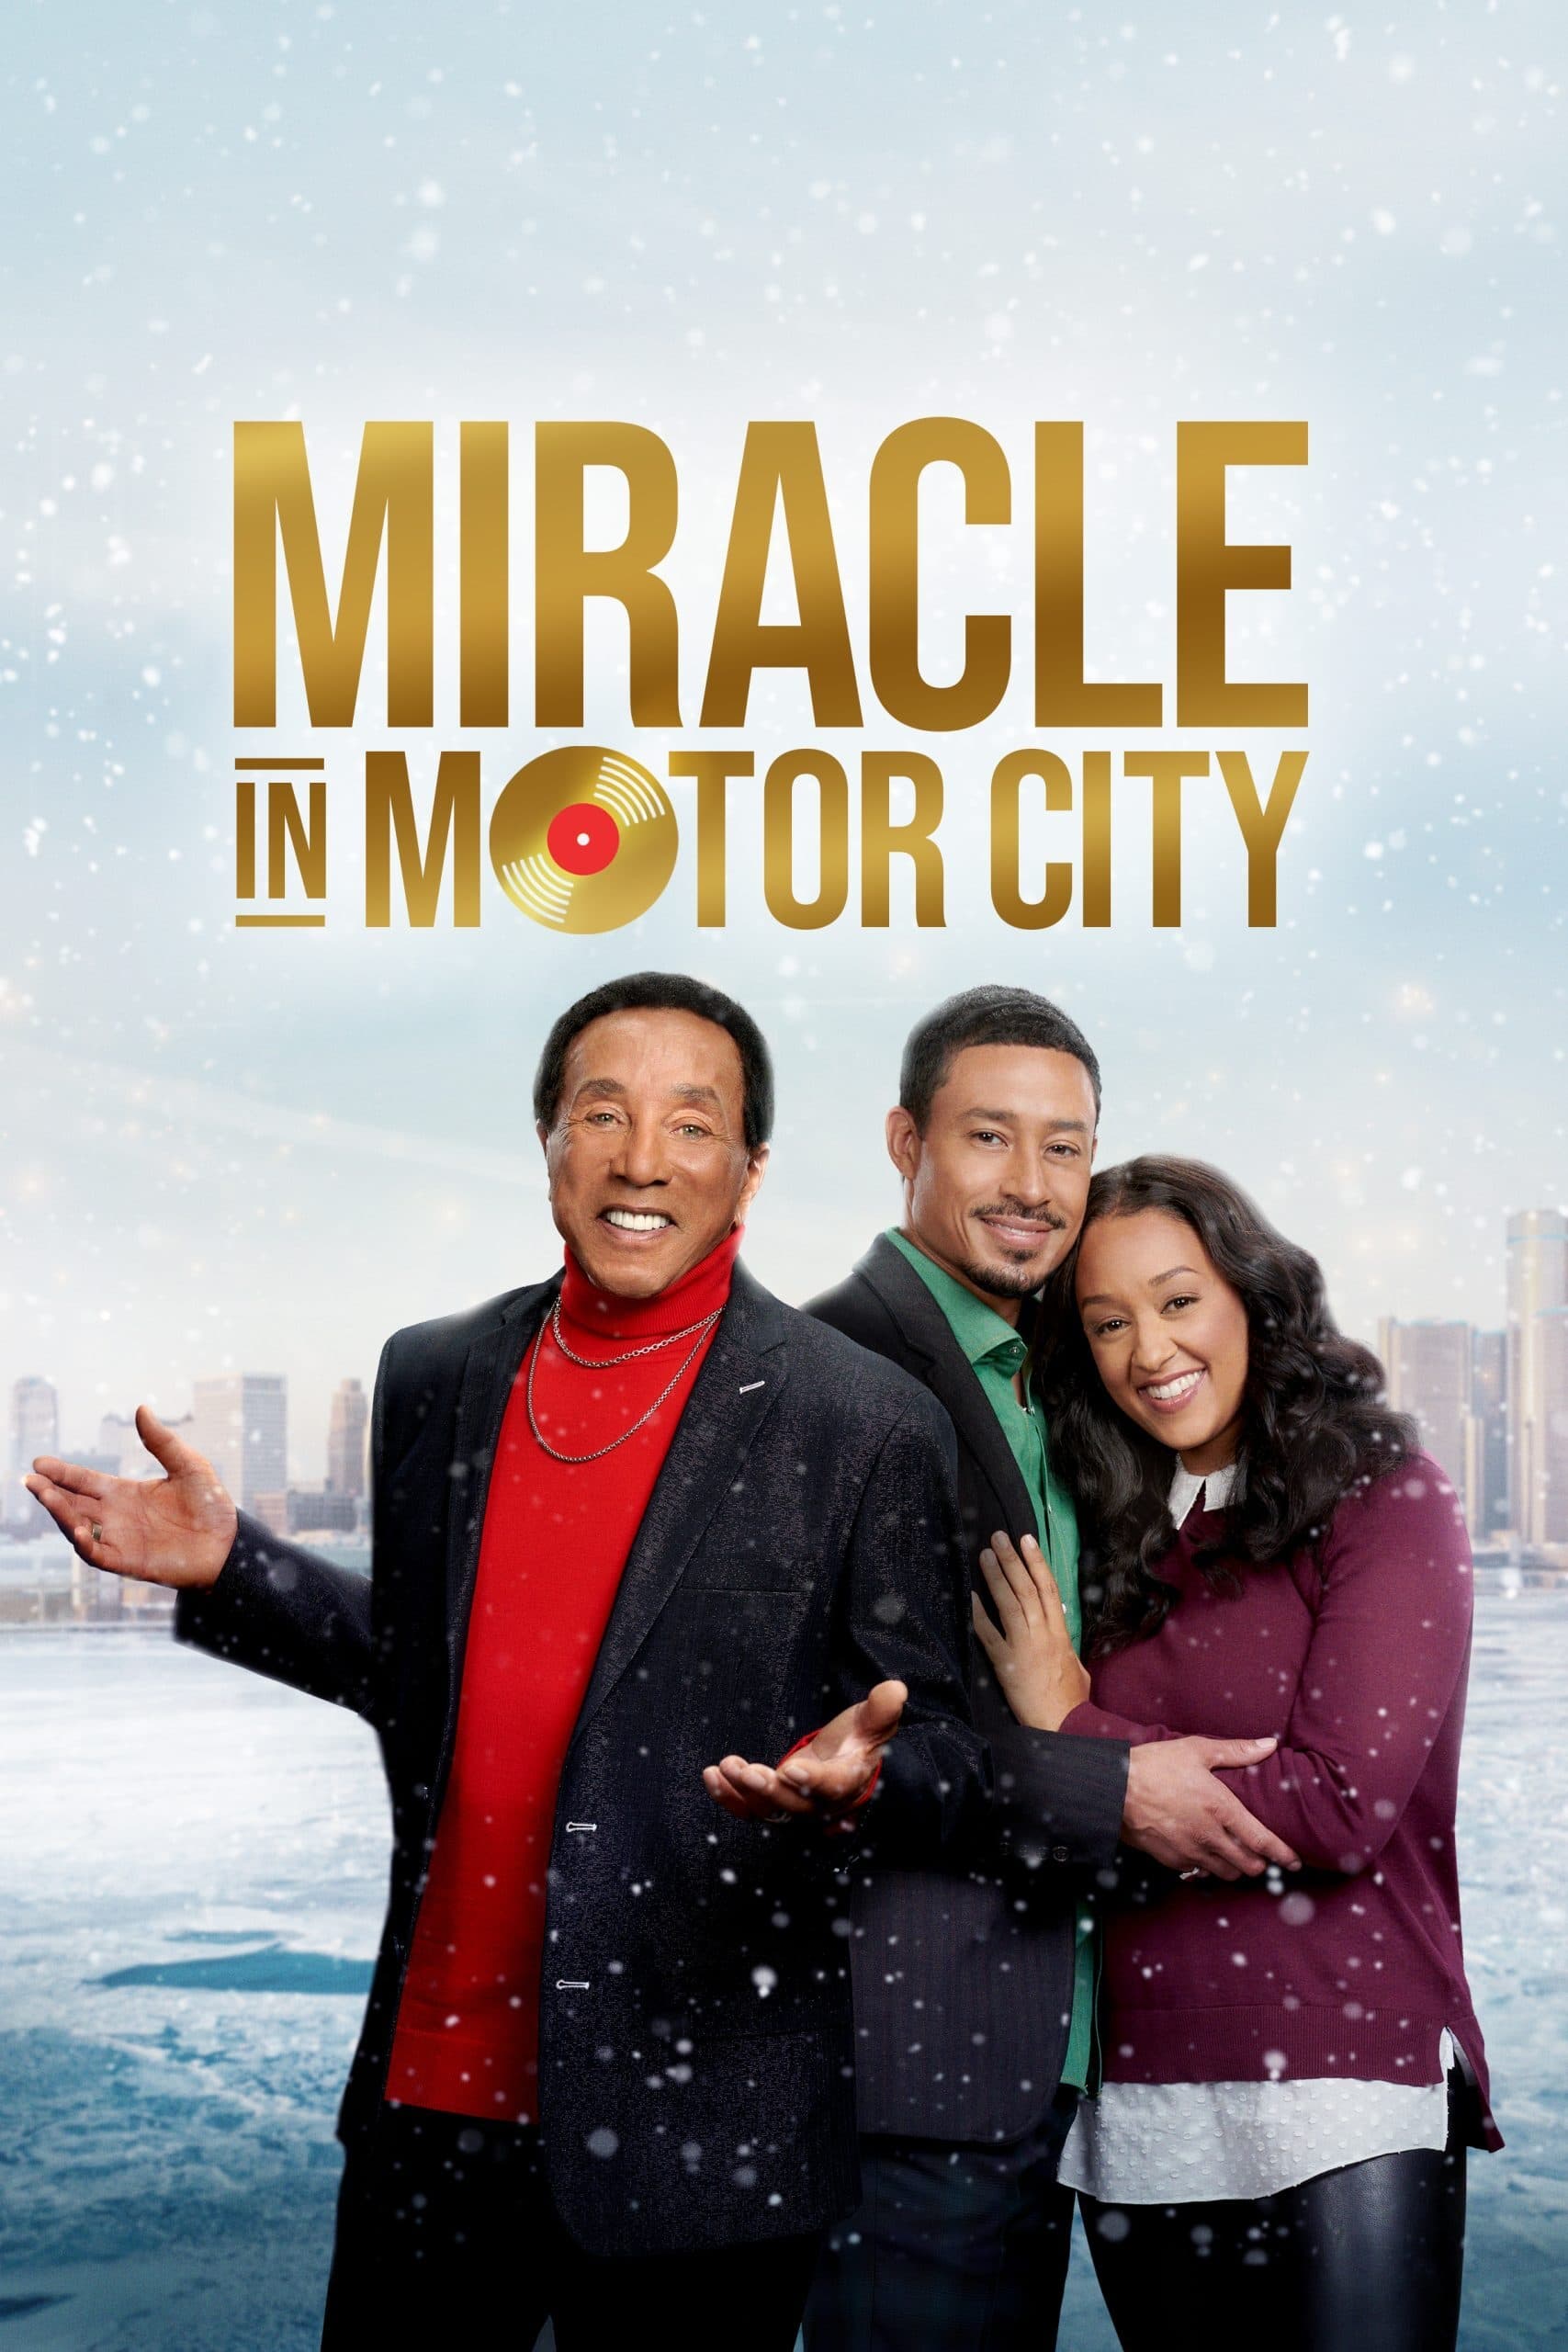 Miracle in Motor City (2021)